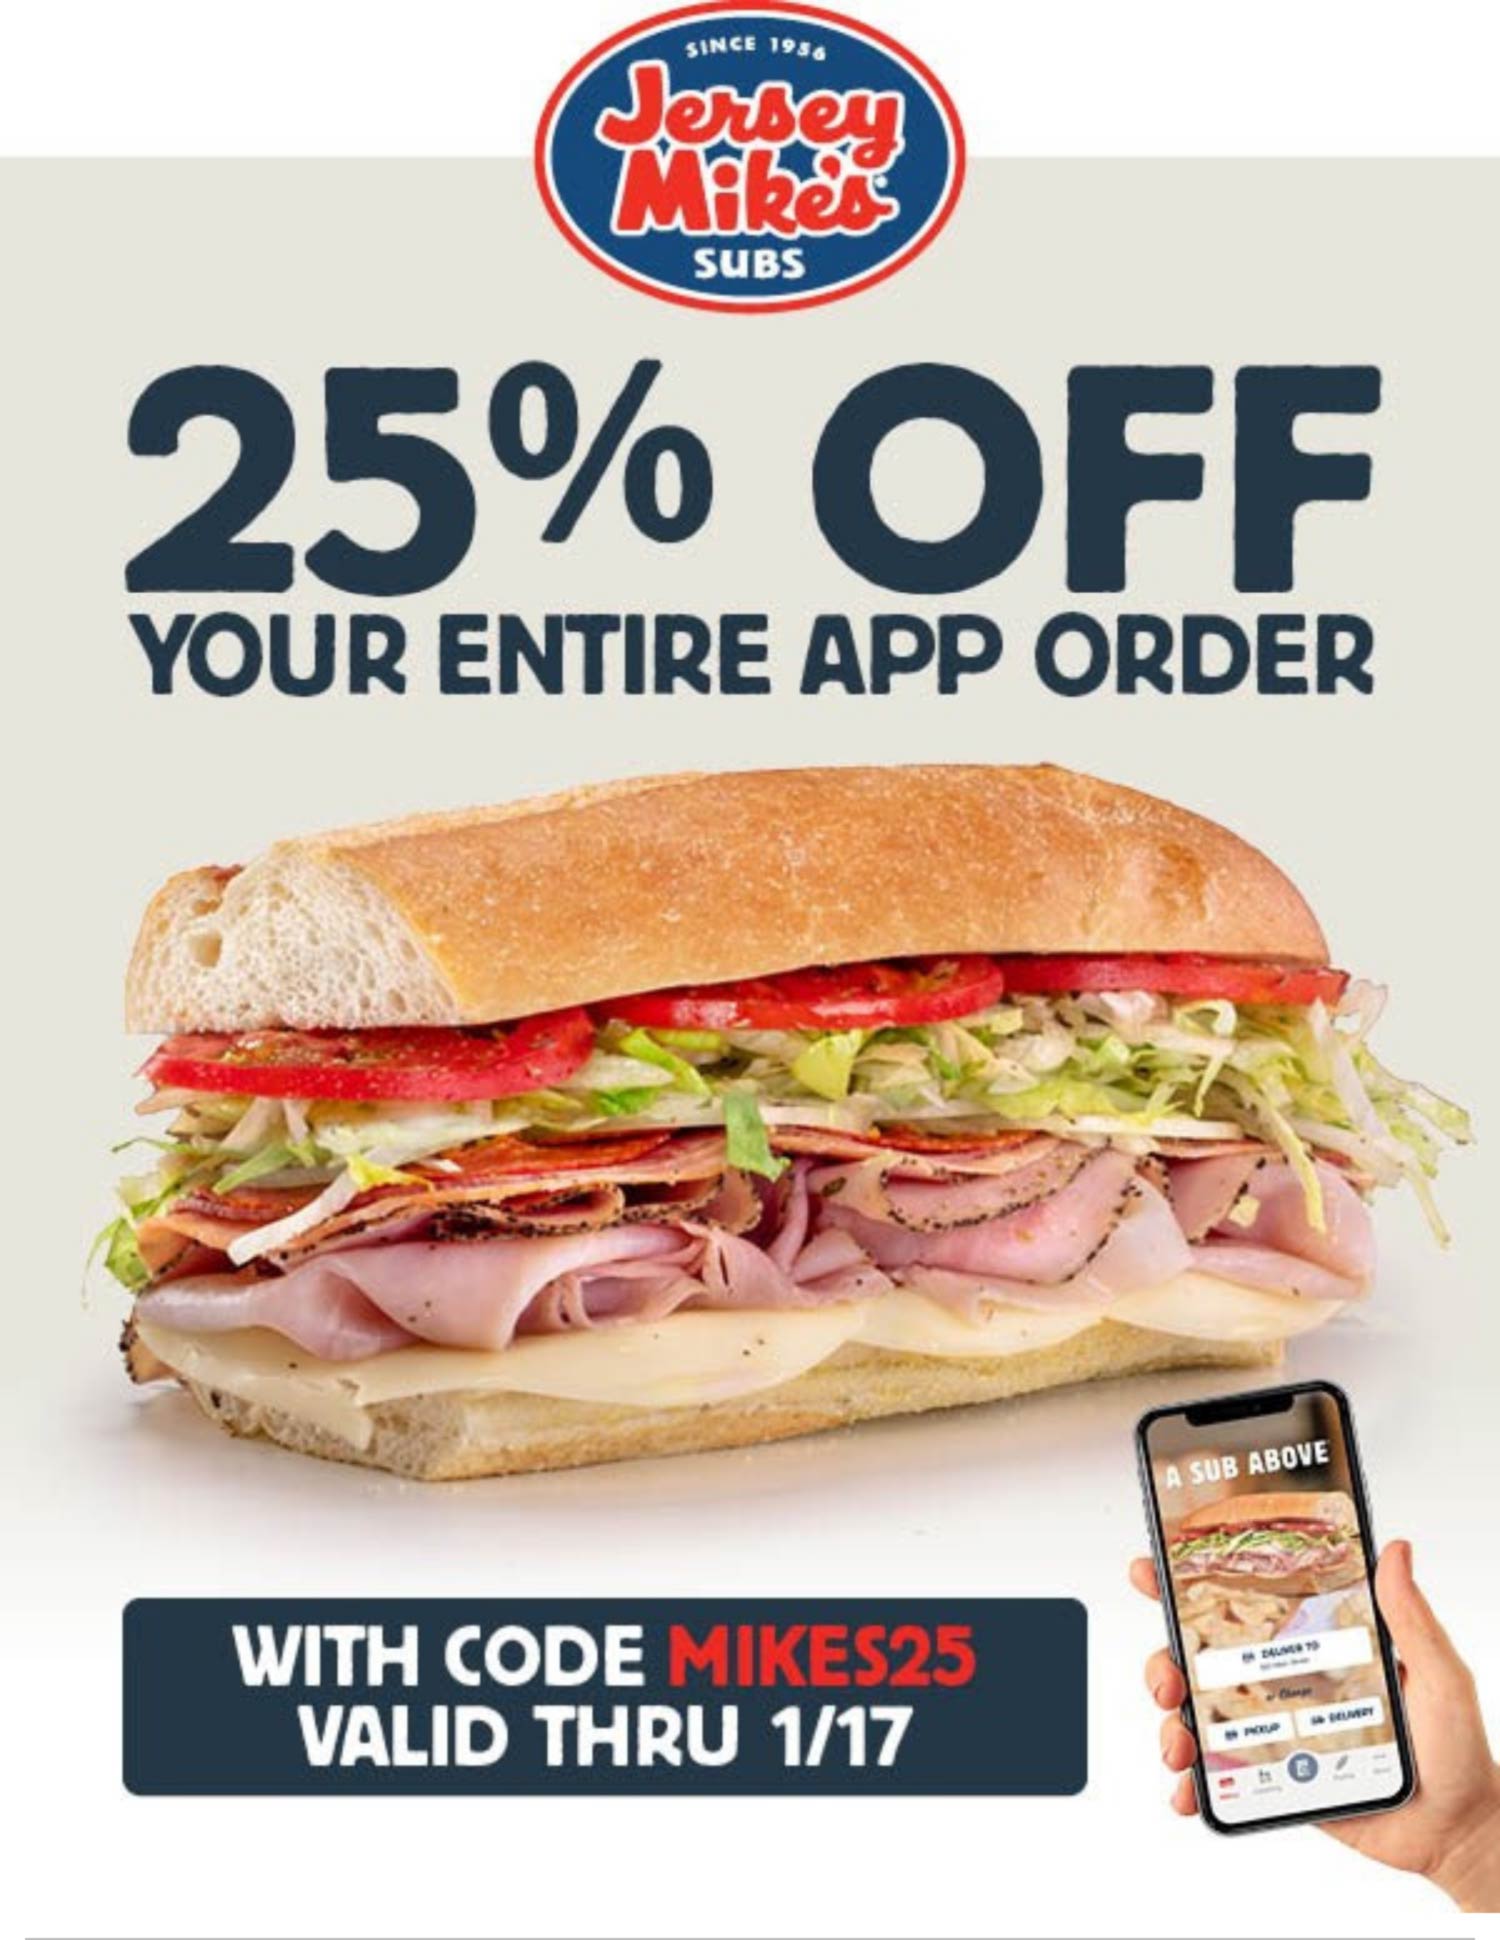 Jersey Mikes restaurants Coupon  25% off online at Jersey Mikes sub sandwich restaurants via promo code MIKES25 #jerseymikes 